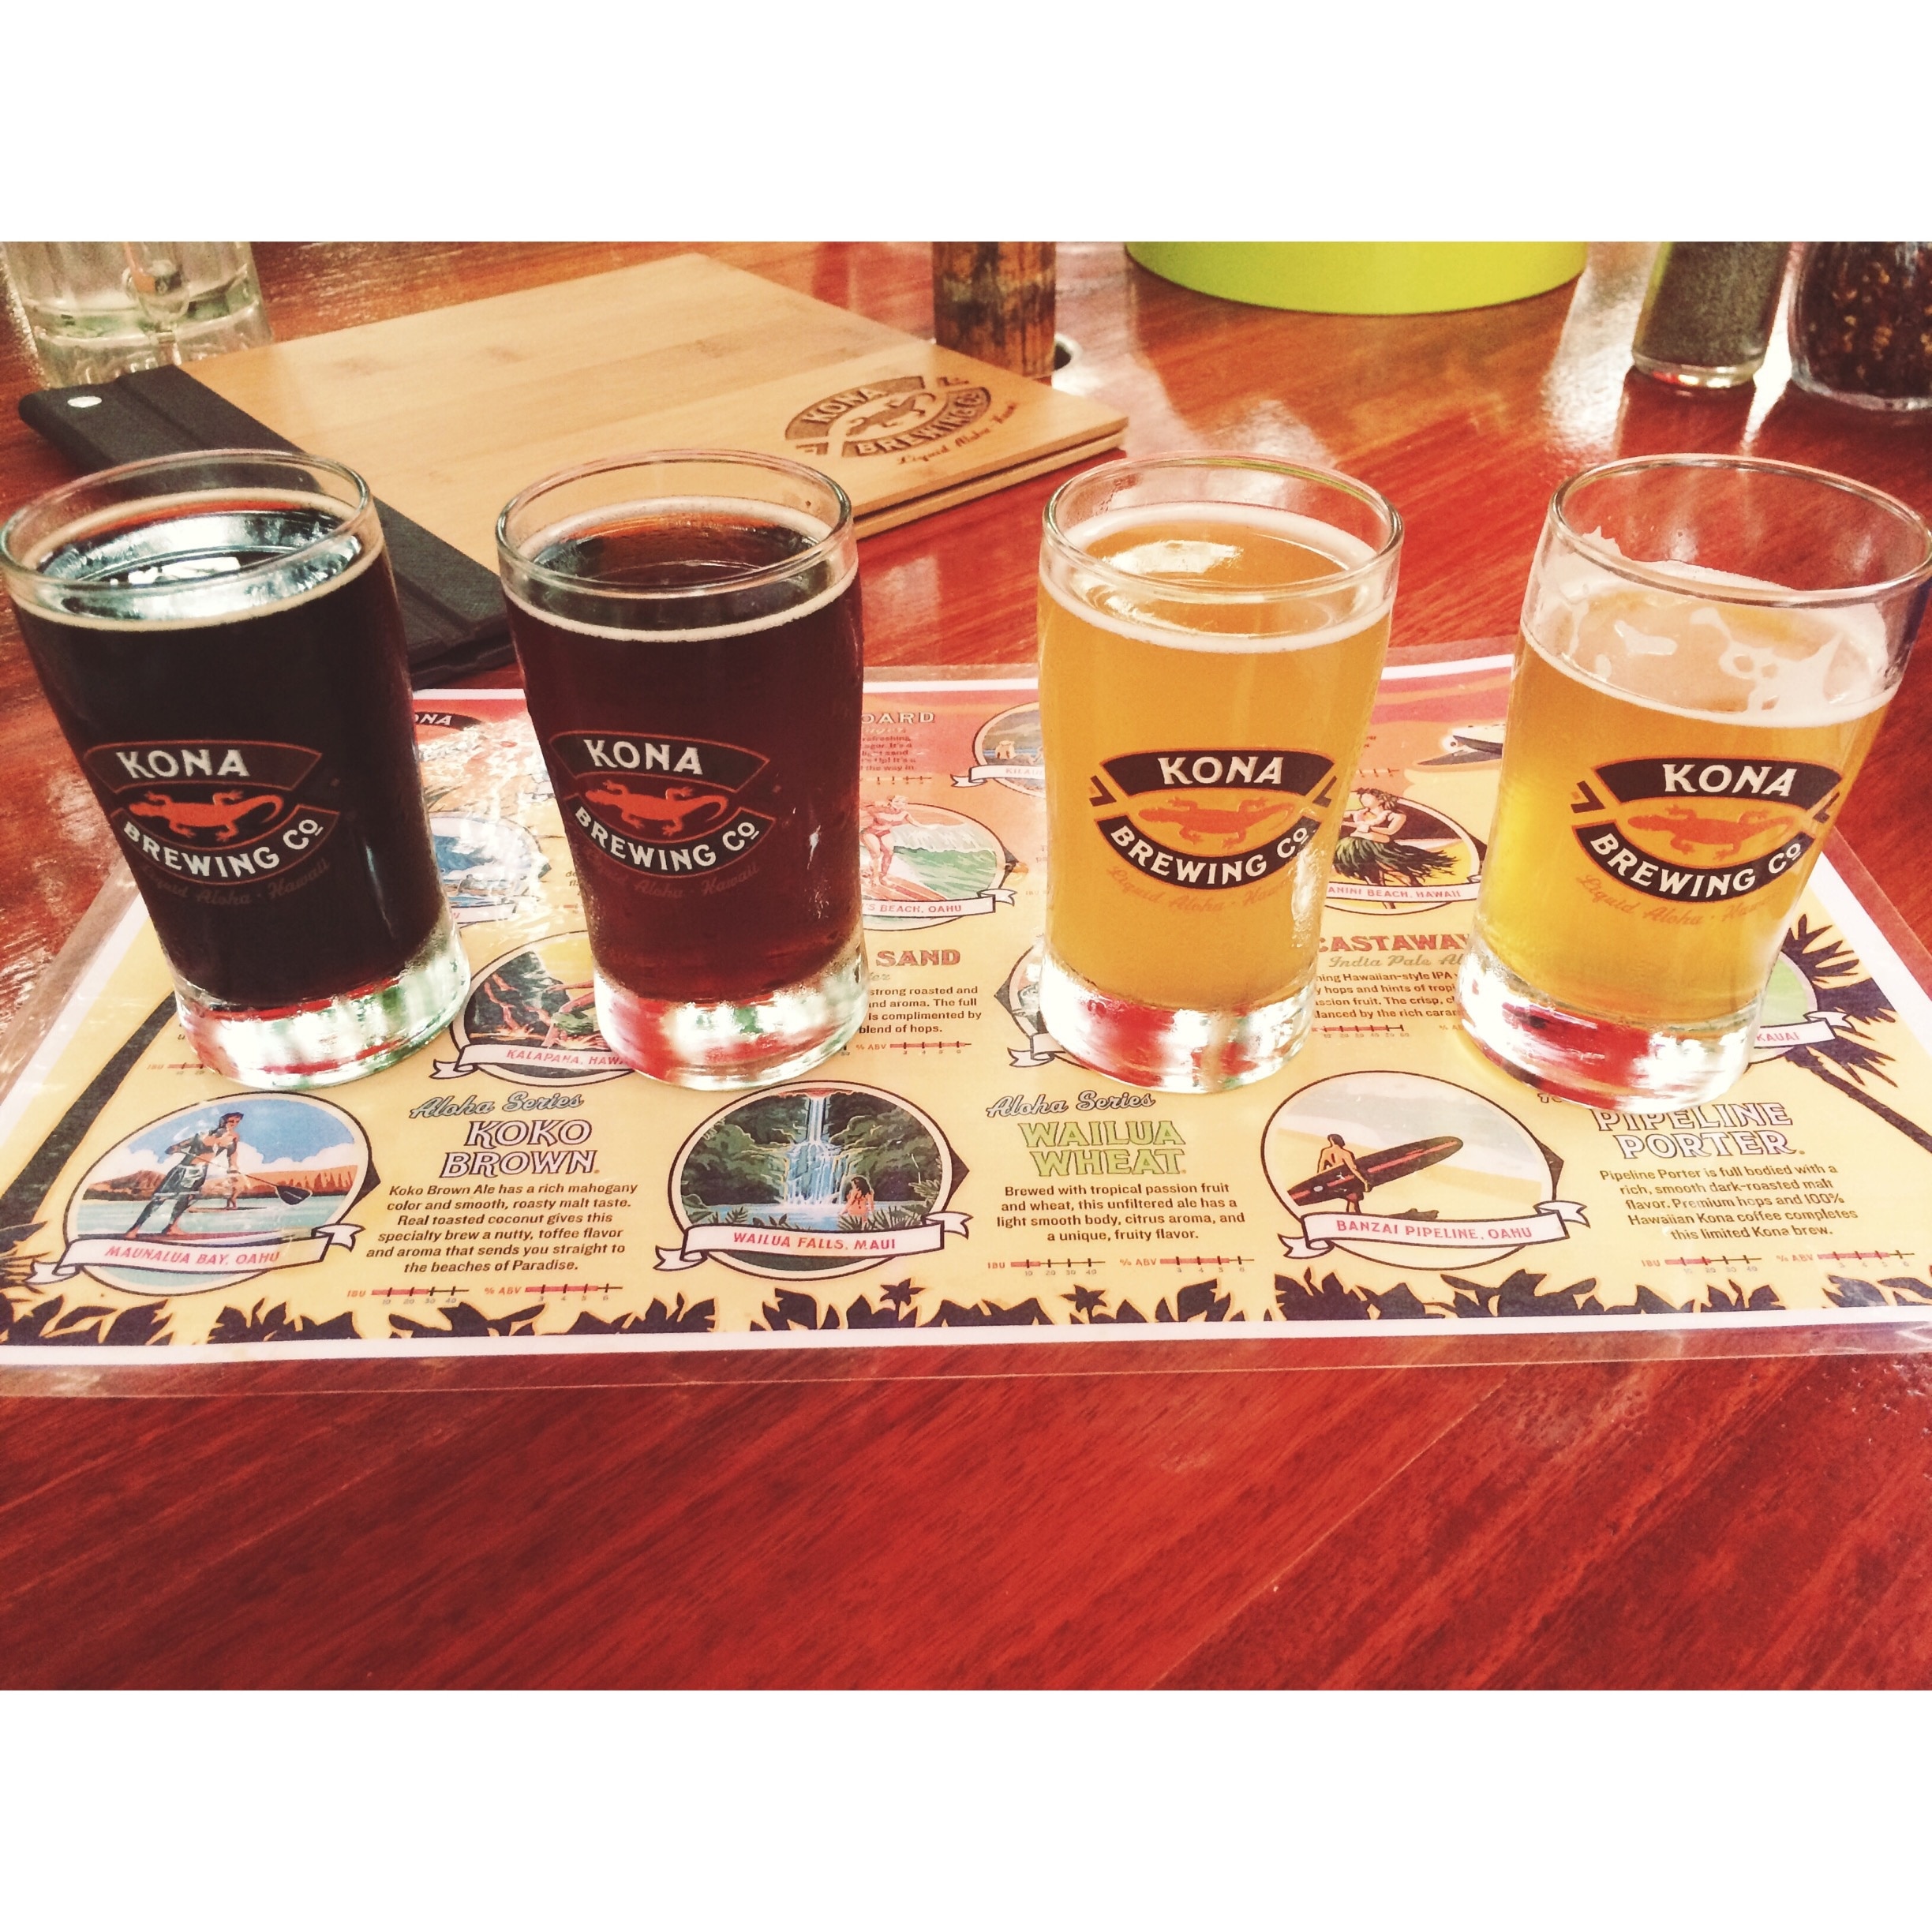 Loved the Hawaiian beer sampler at the Kona Brewing Company. Lots of flavours including passion fruit, coffee, coconut and lemongrass!